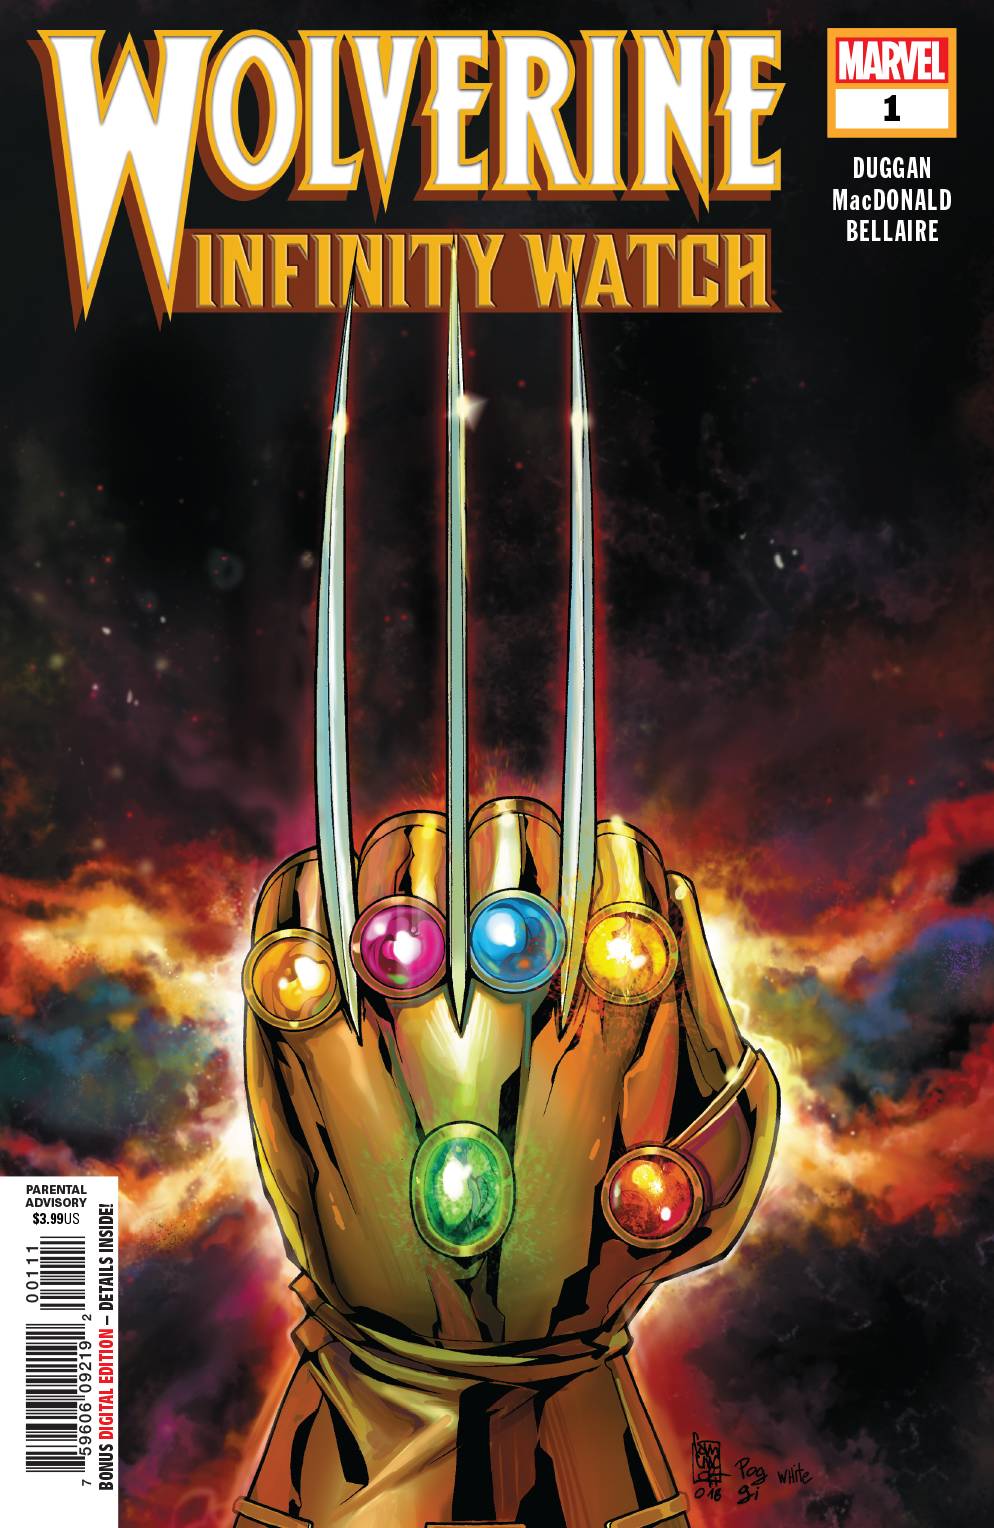 Wolverine Infinity Watch #1 (of 5) [2019]